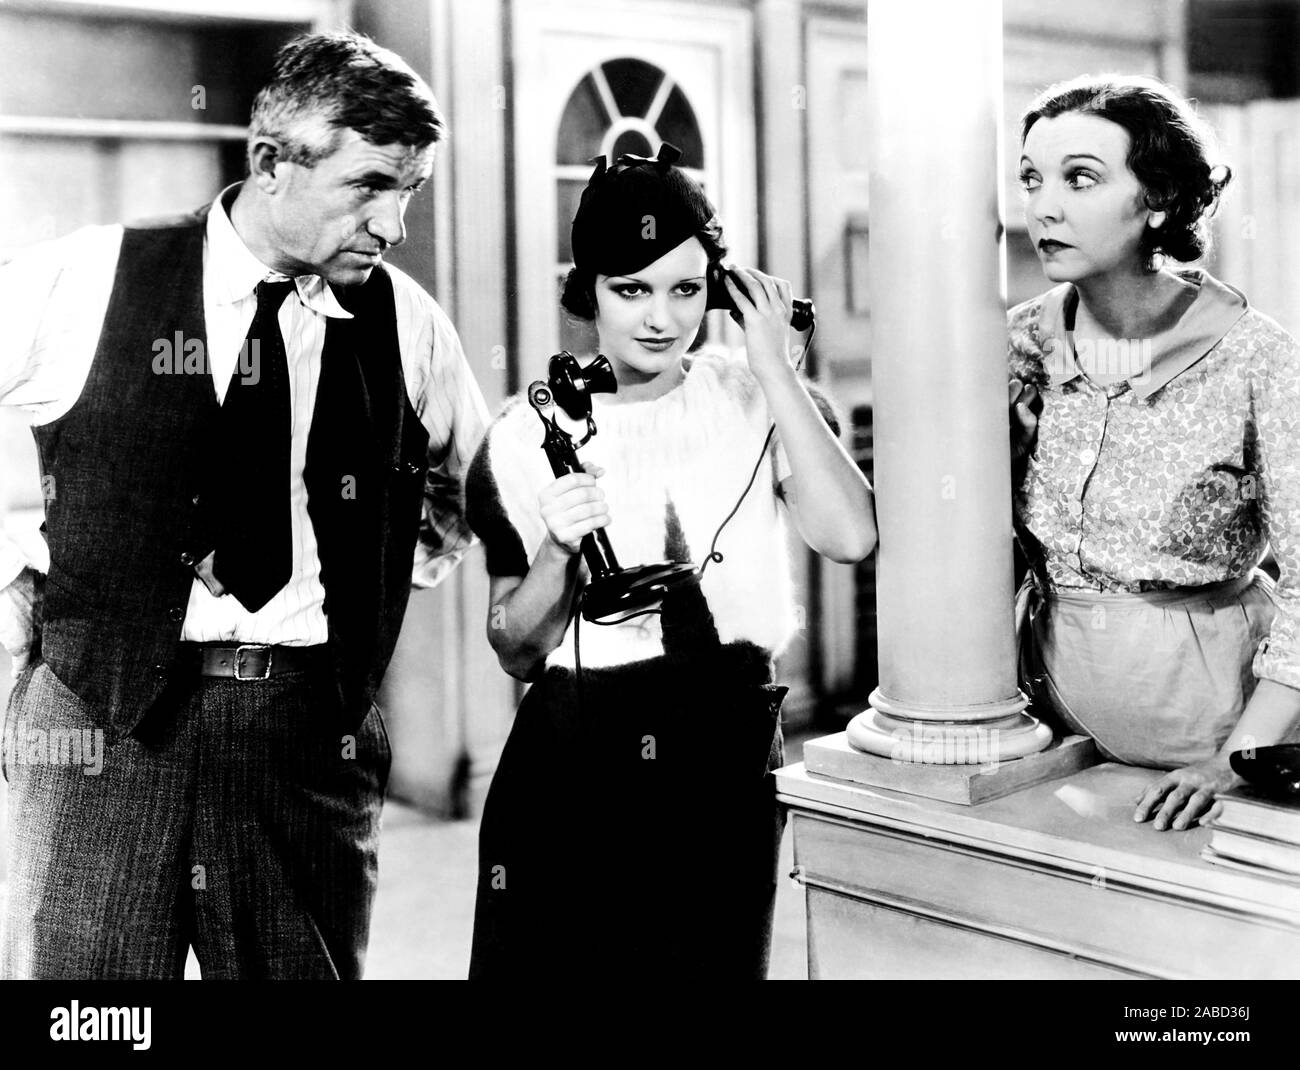 MR. SKITCH, from left: Will Rogers, Rochelle Hudson, Zasu Pitts, 1933 ...